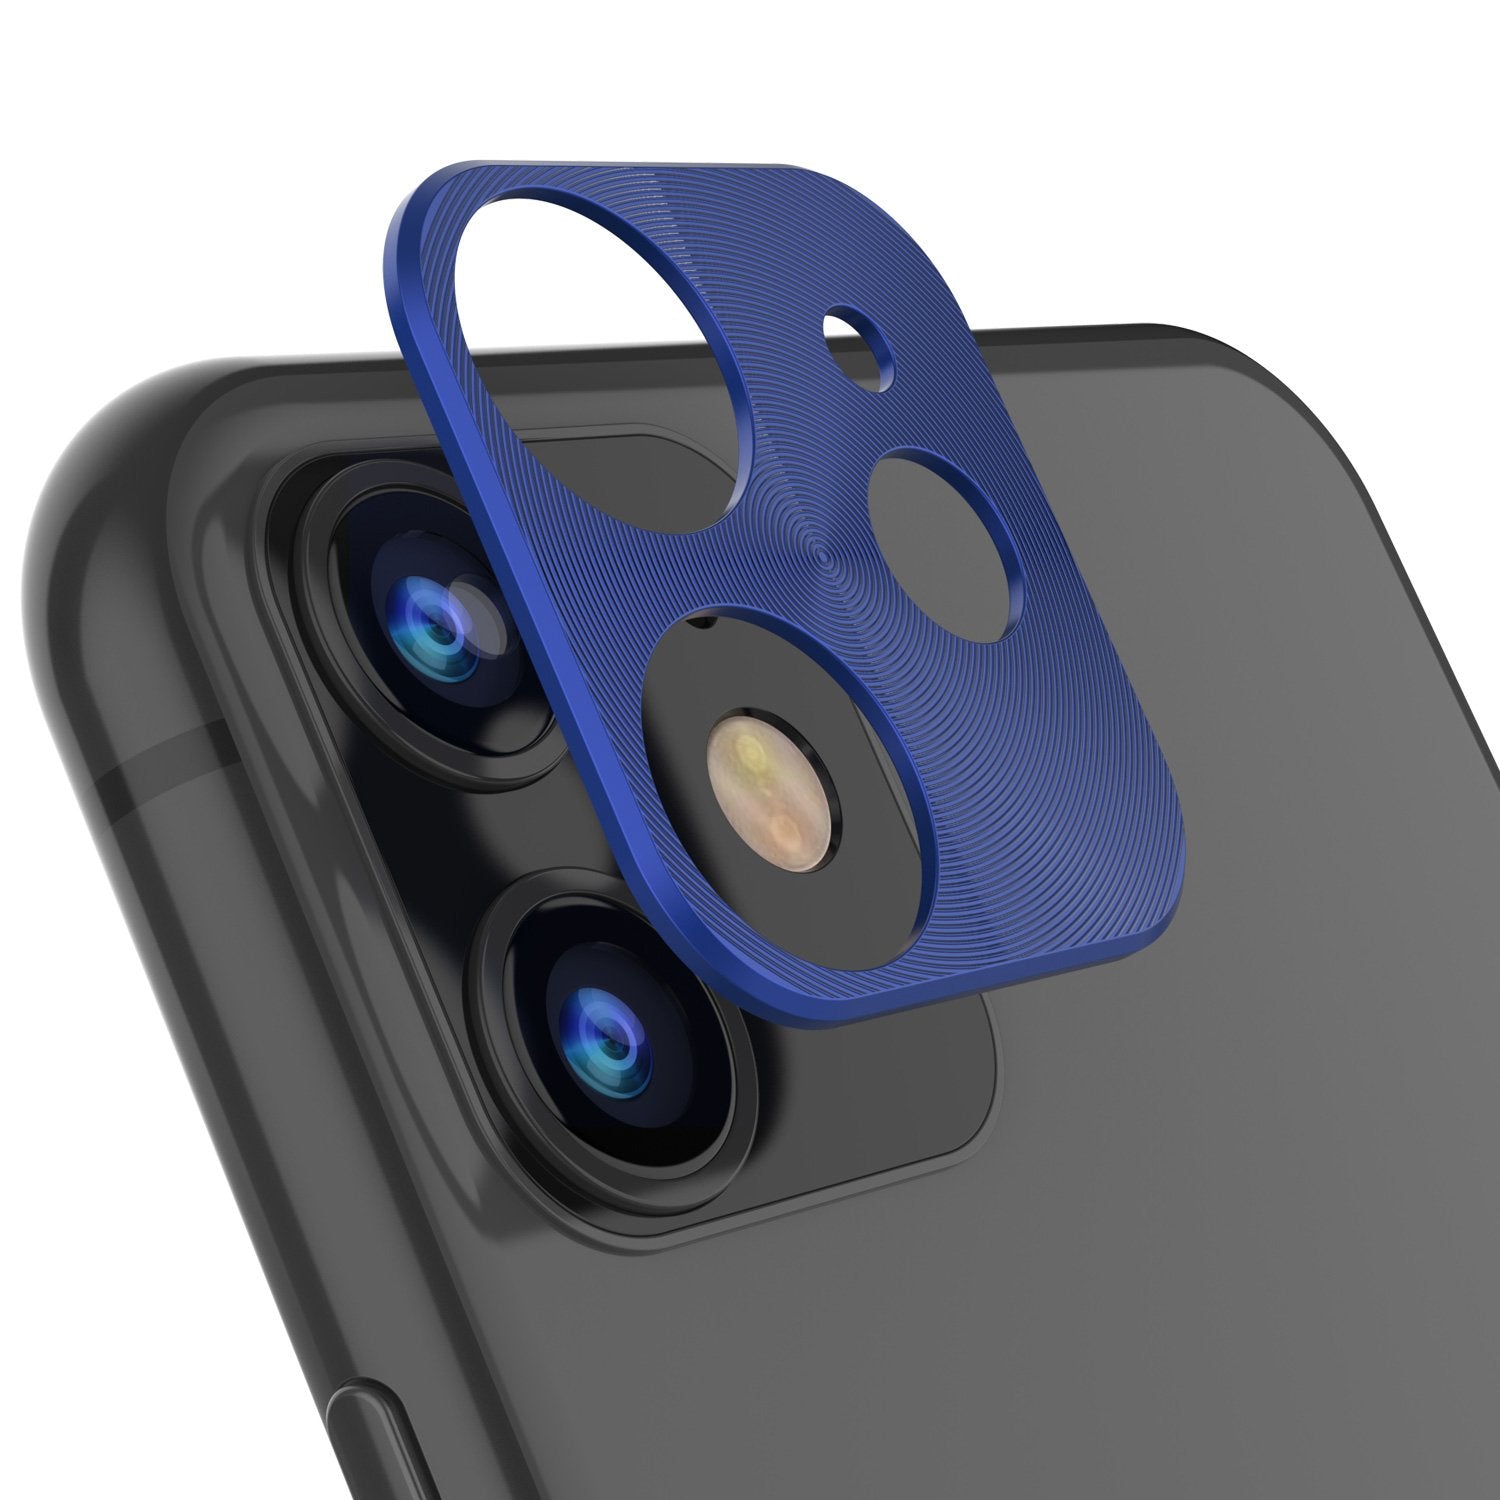 Punkcase iPhone 11 Camera Protector Ring [Blue]